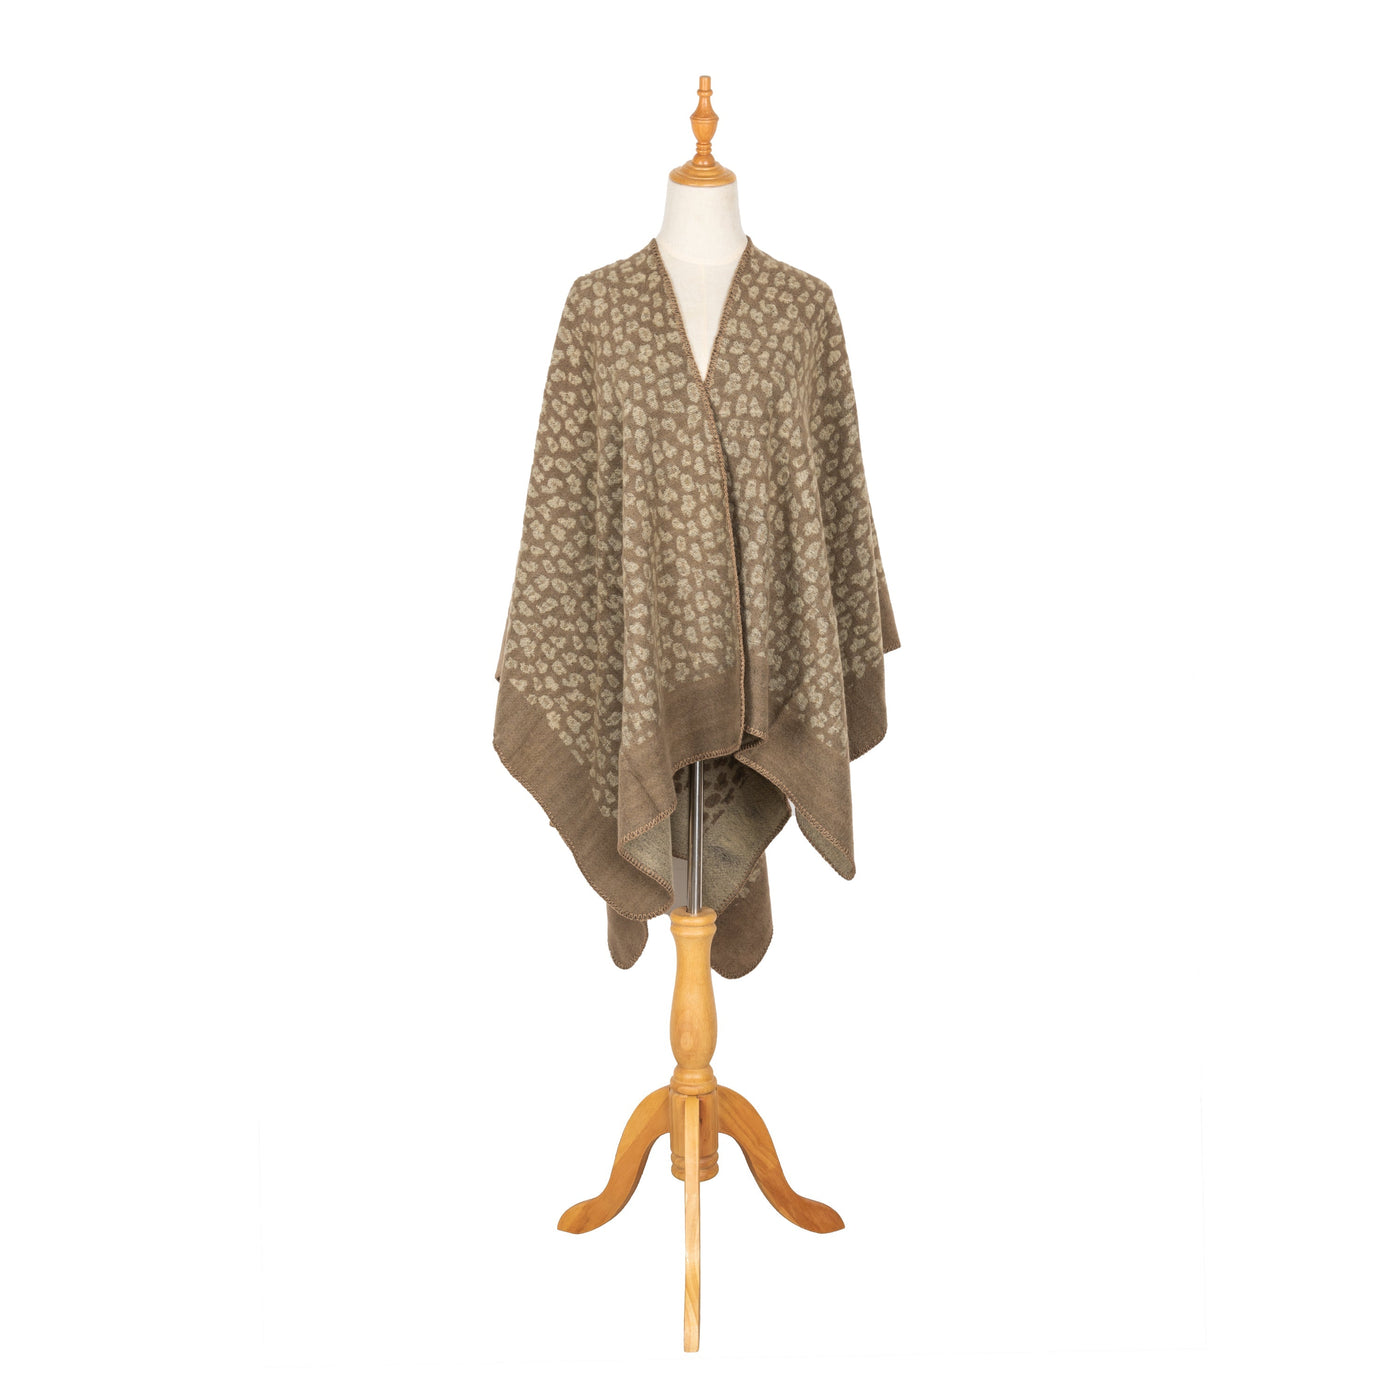 PONCHO - Marybeth - Womens Jacquard Leopard Open Front Poncho